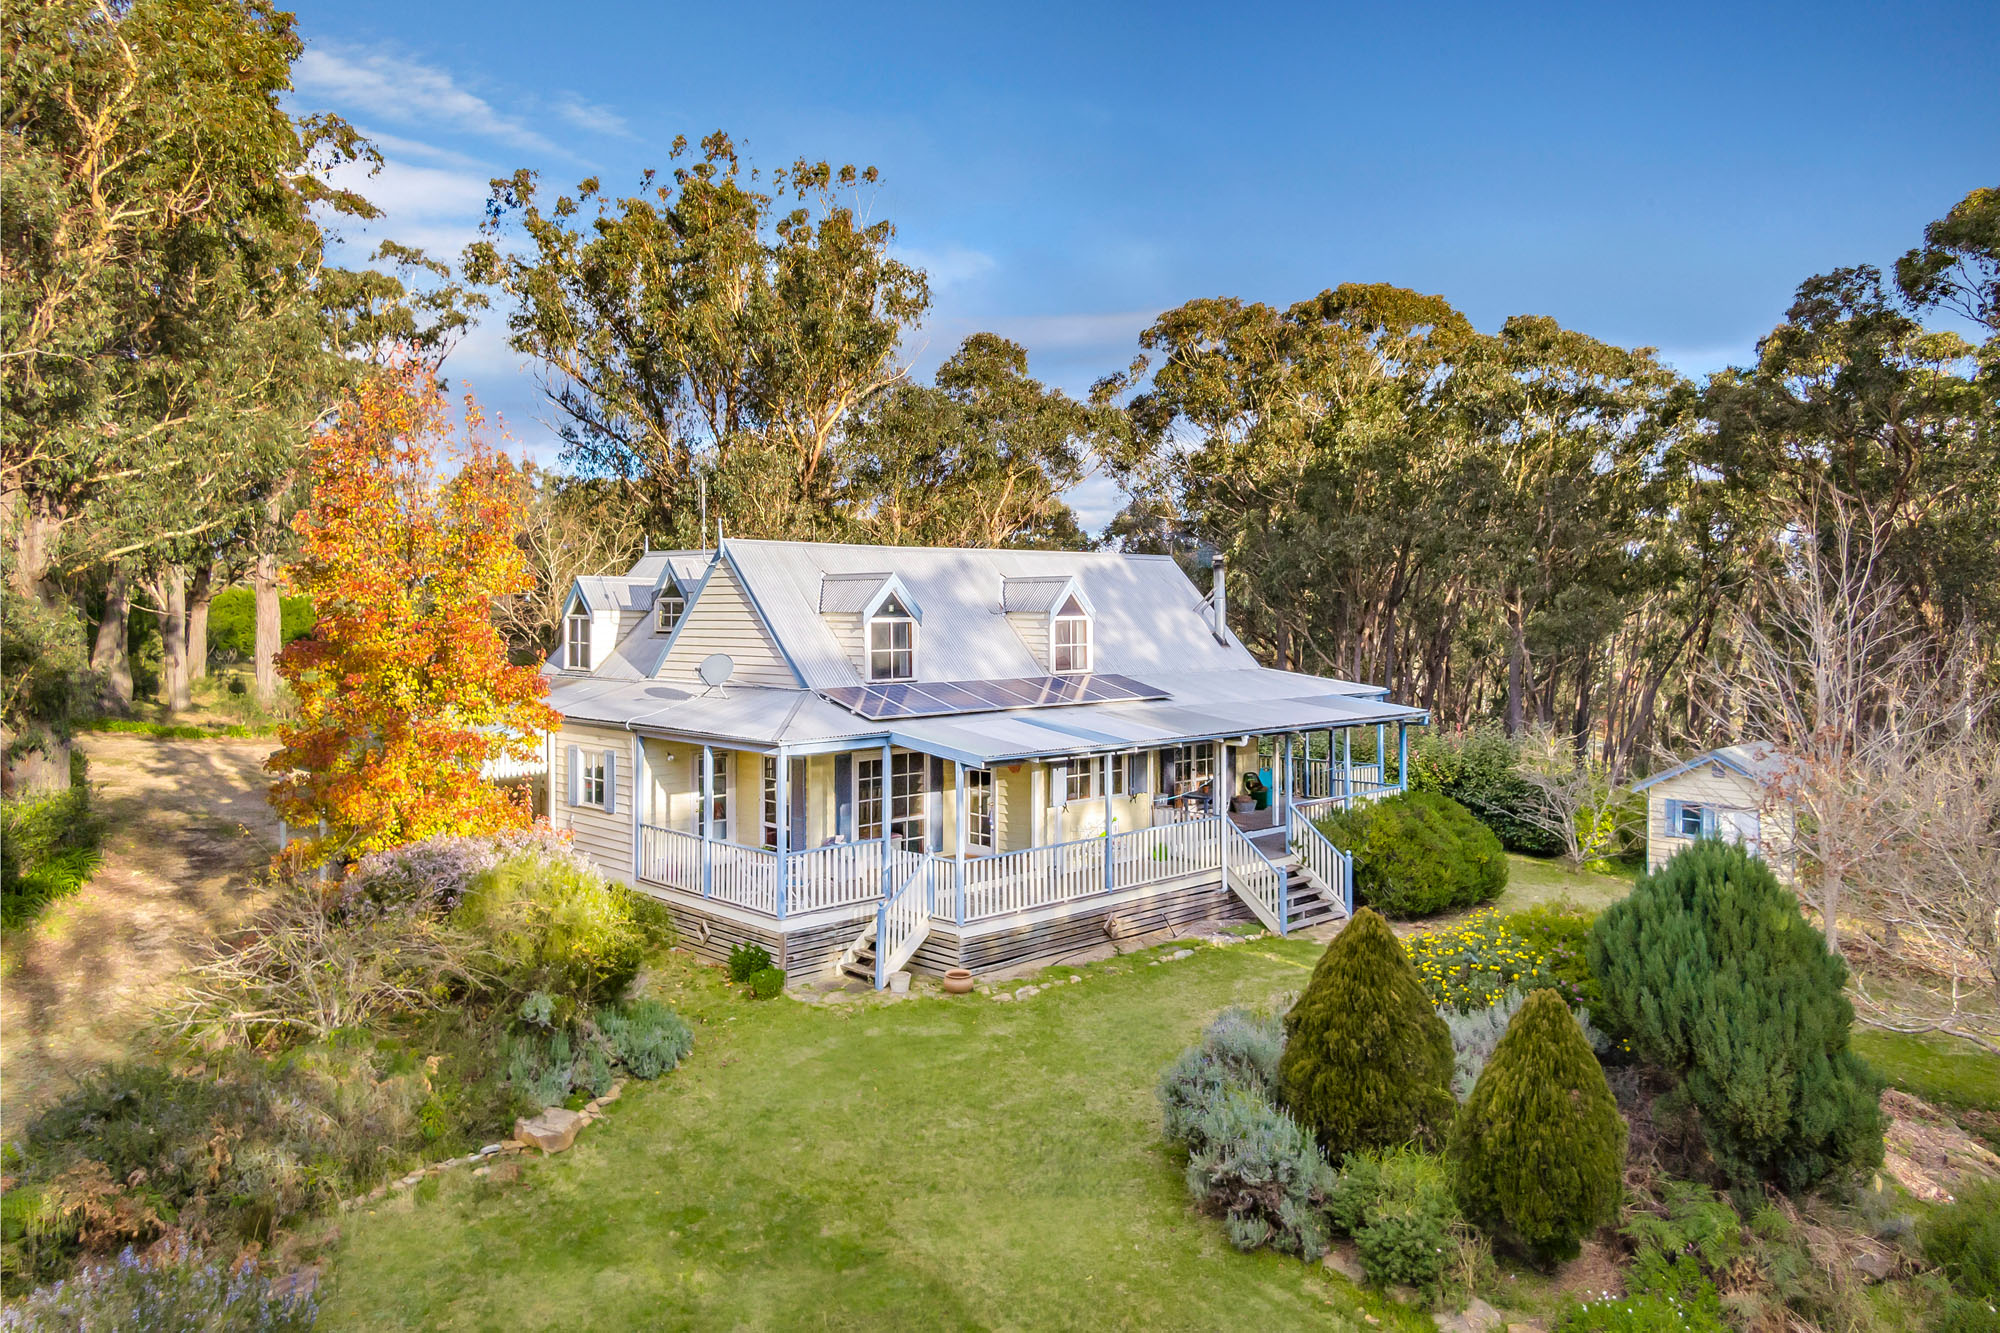 A wealth of nature surrounds picture-book perfection in Berrima